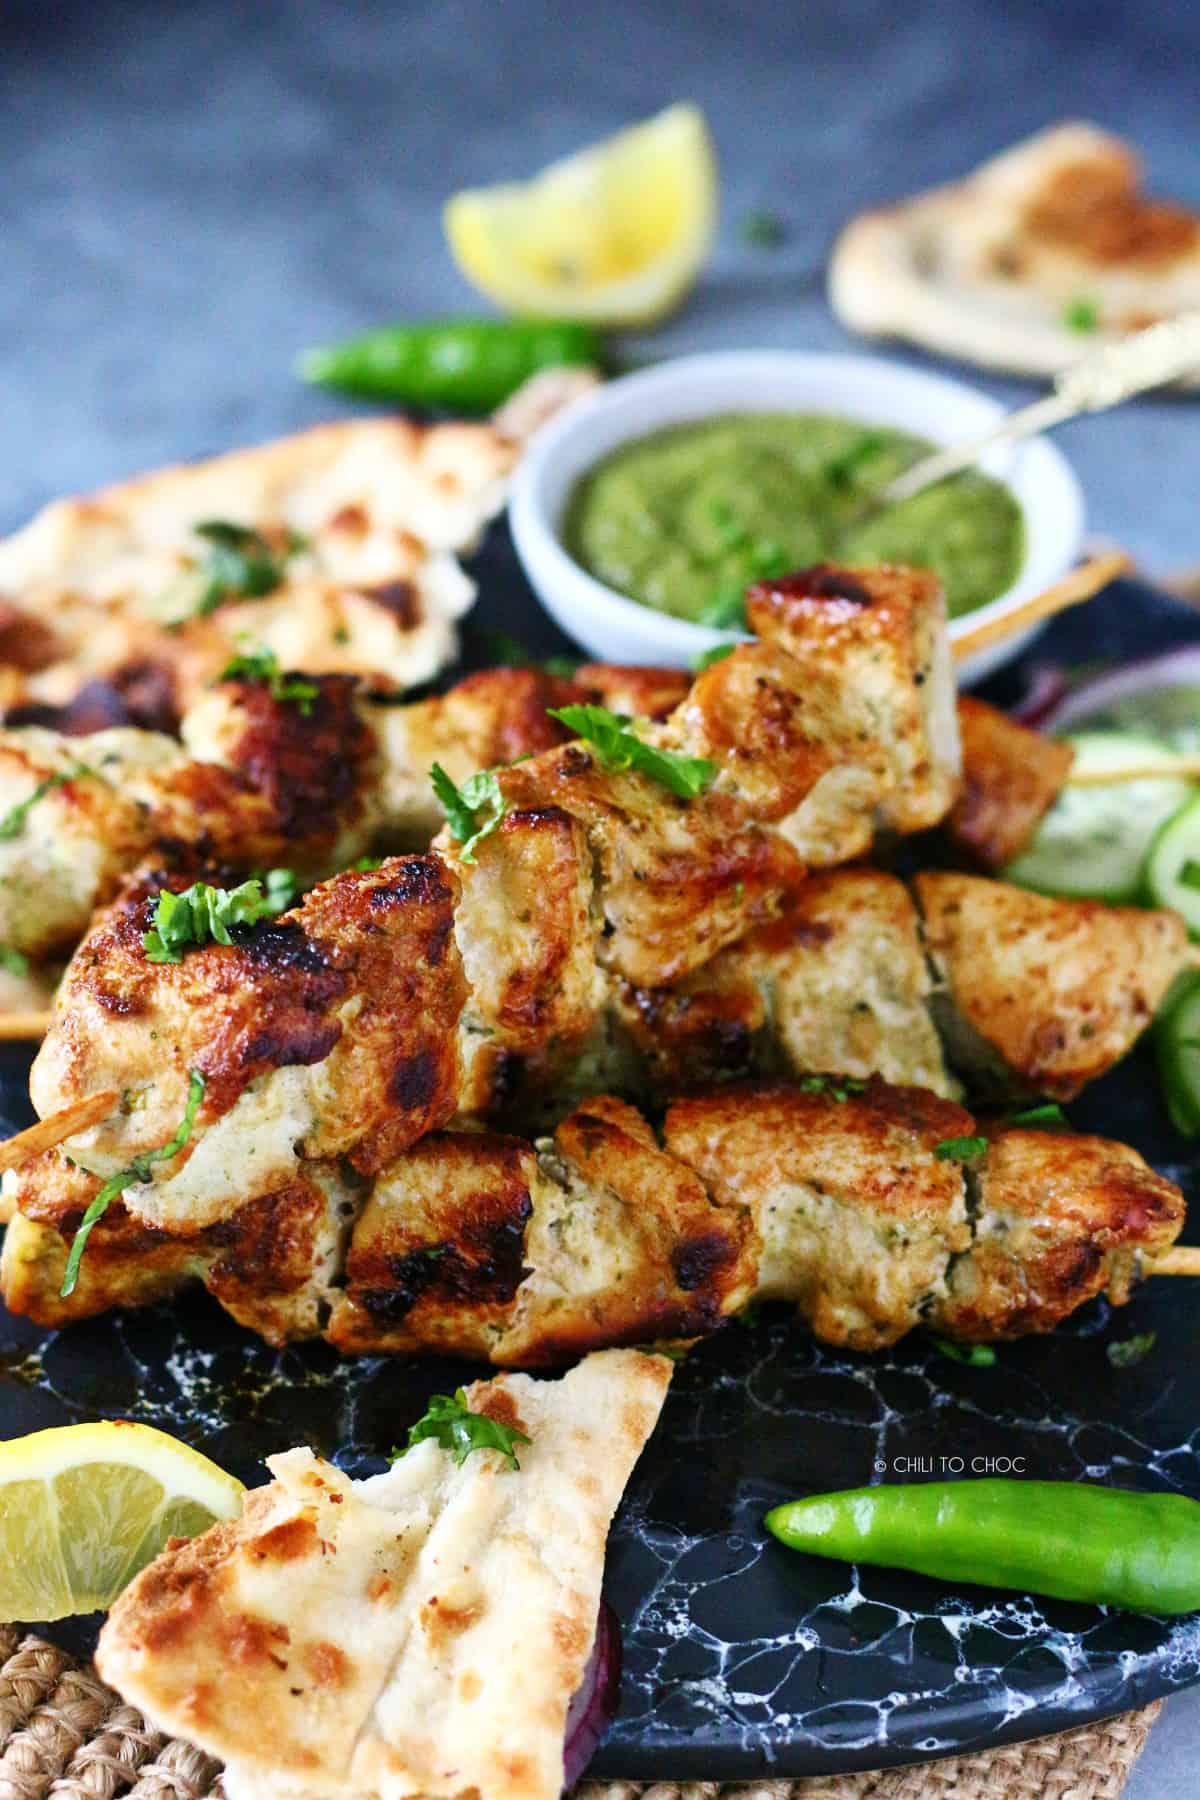 Malai tikka skewers on a marble dish with garnishes on the side.